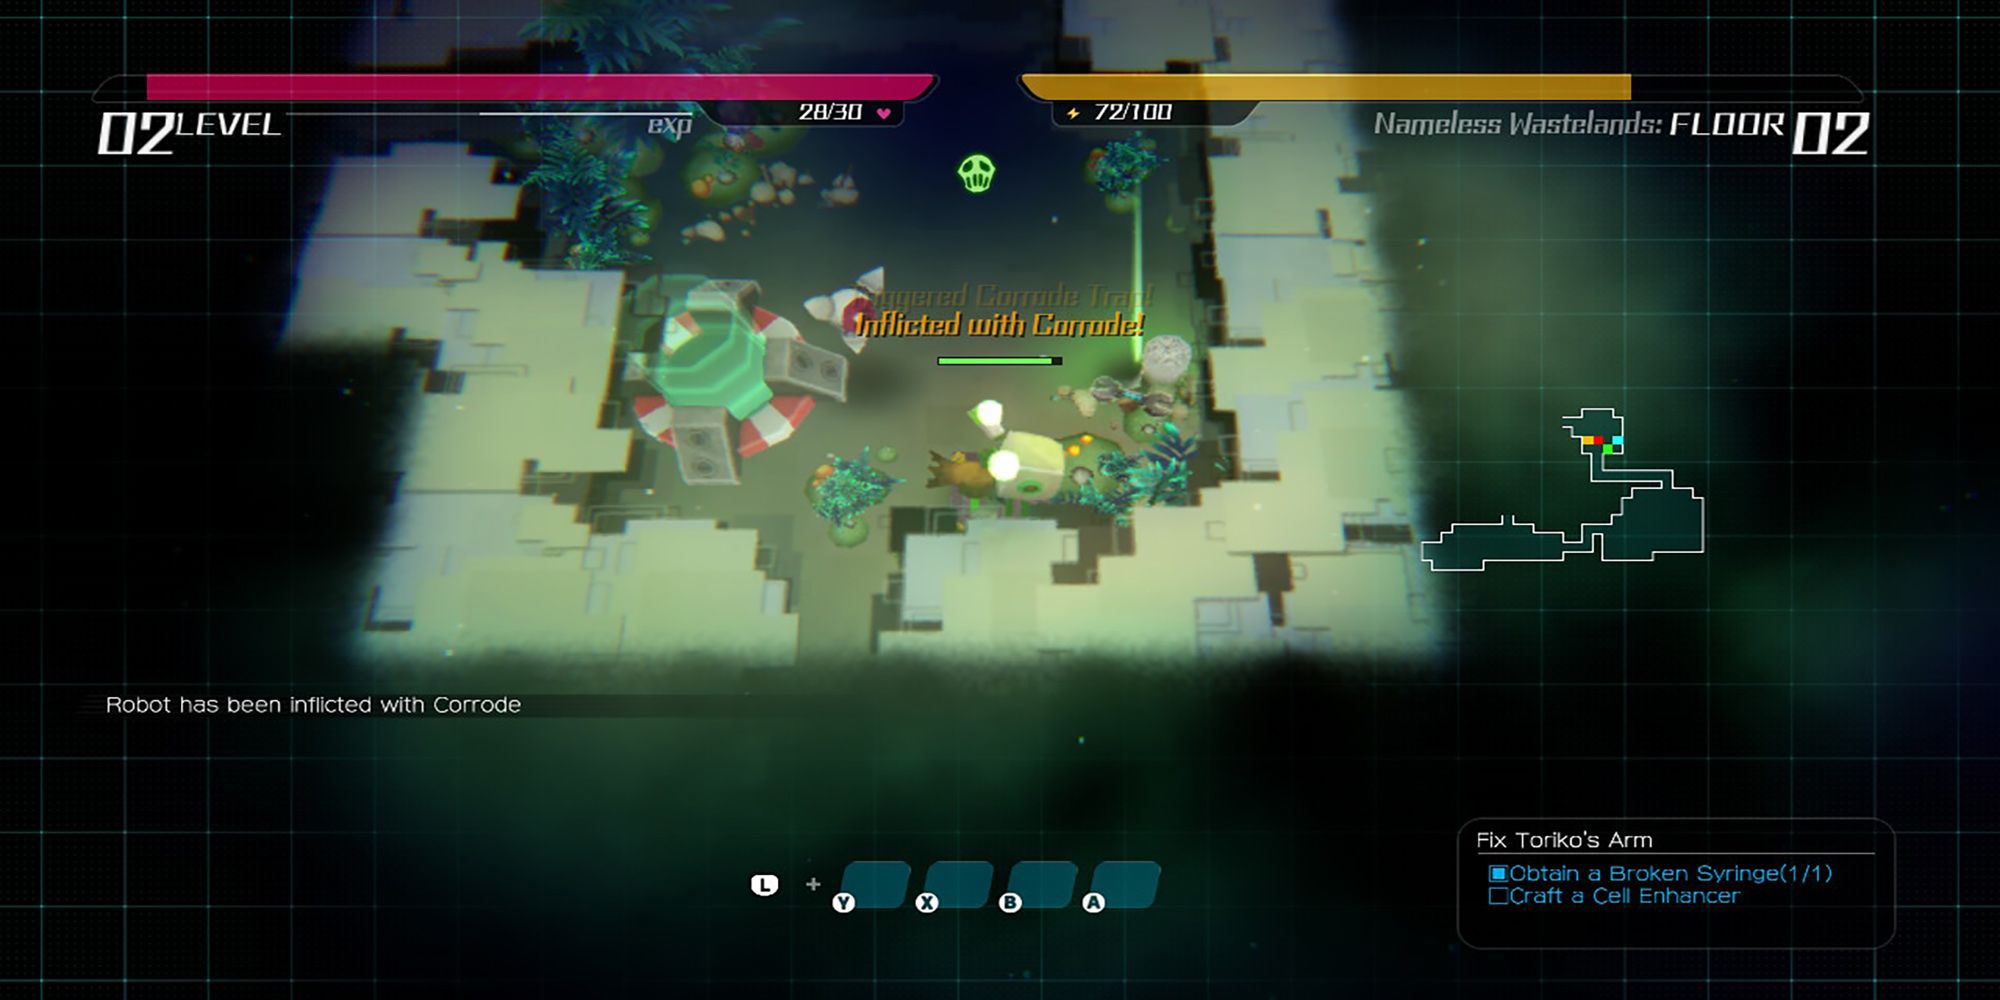 Robbie gets inflicted with Corrosion due to a trap near a Floor Portal in Void Terrarium 2.